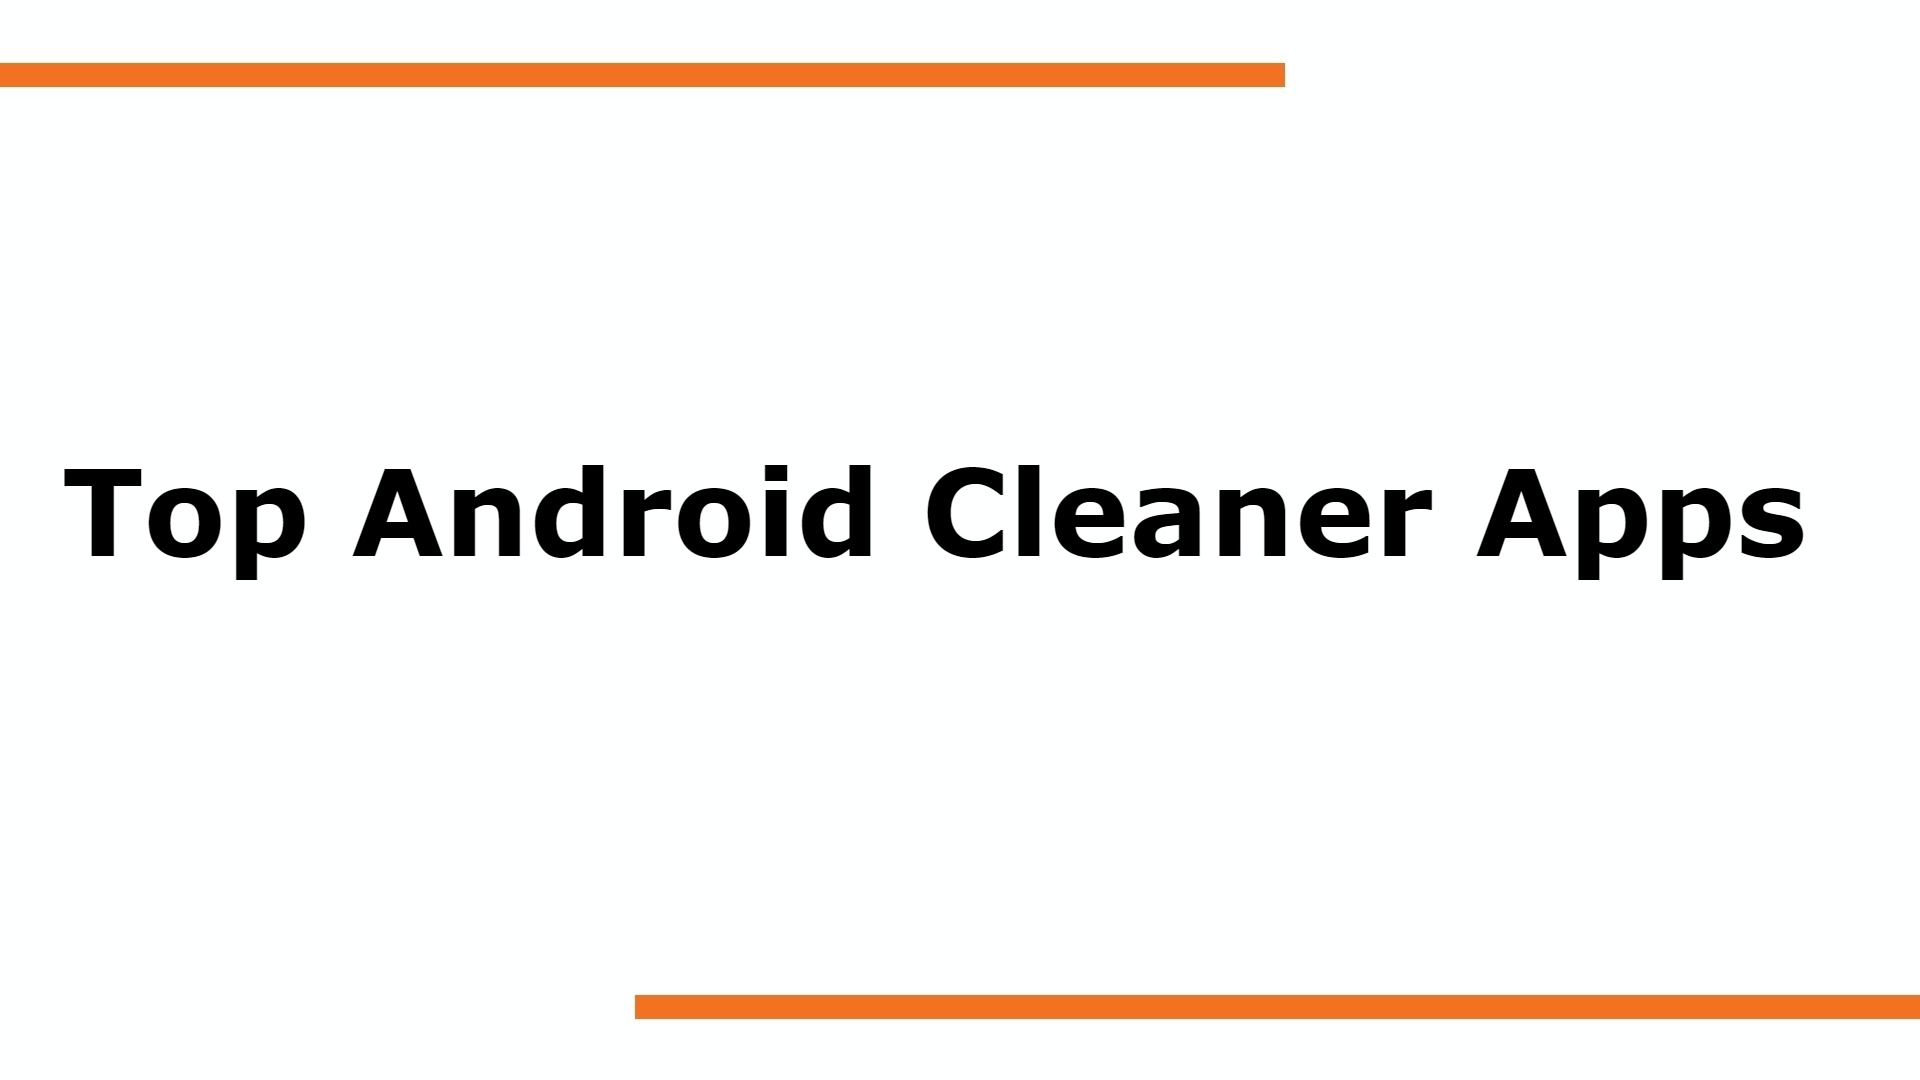 Top Android Cleaner Apps without Annoying Ads